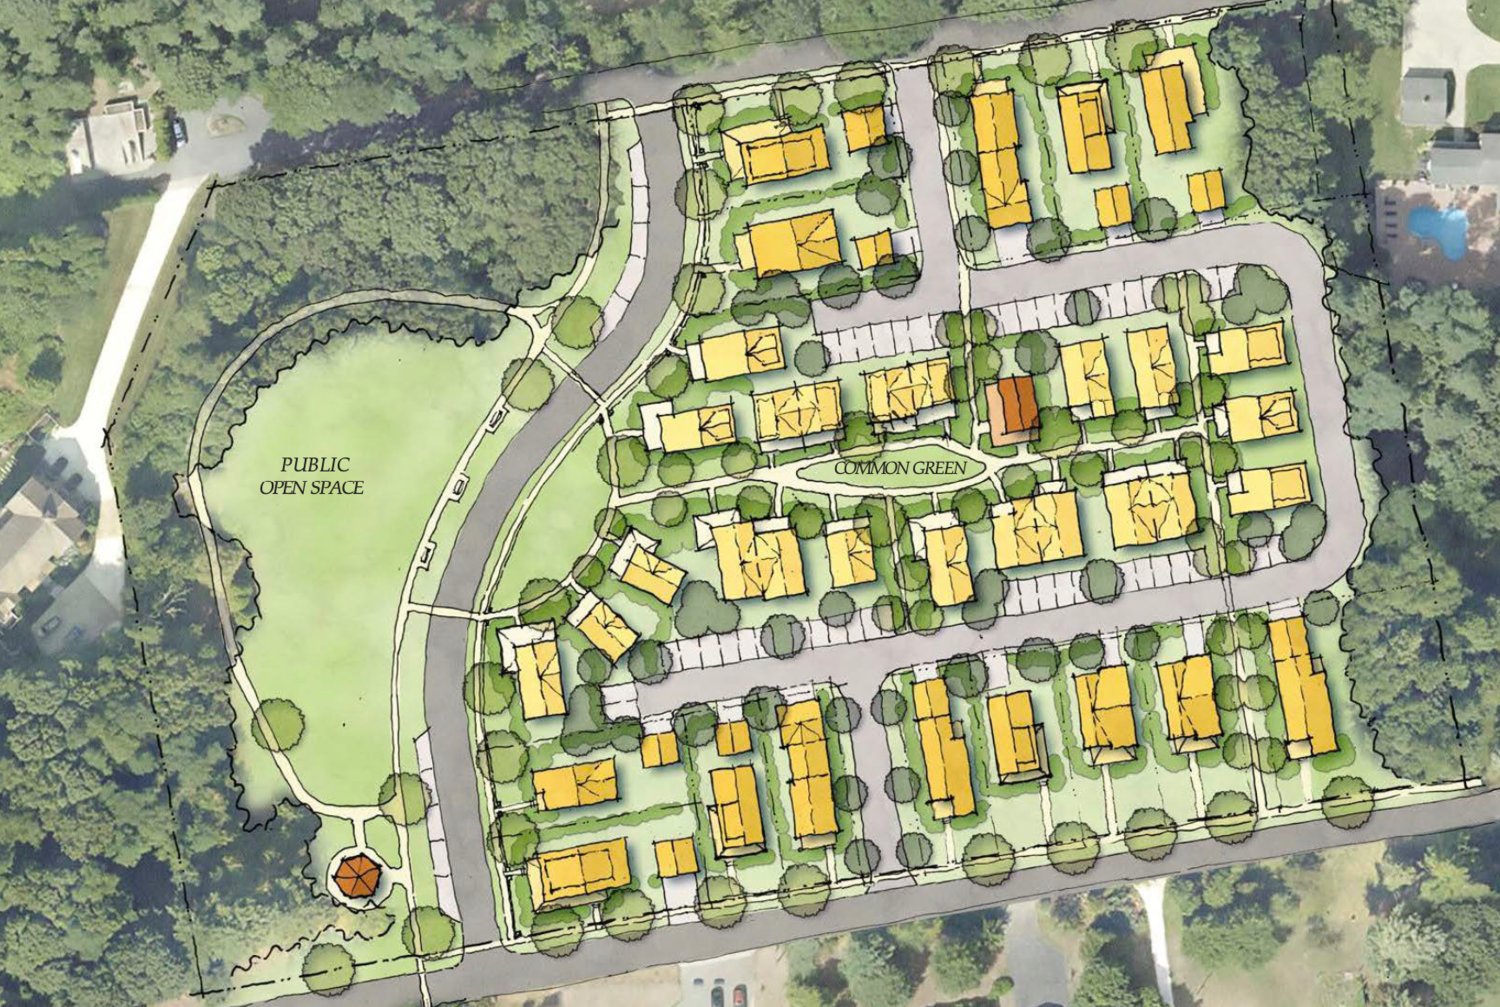 The “proposed concept plan” shows 36 units (22 cottage units and 14 single-family units) on less than five acres of land.